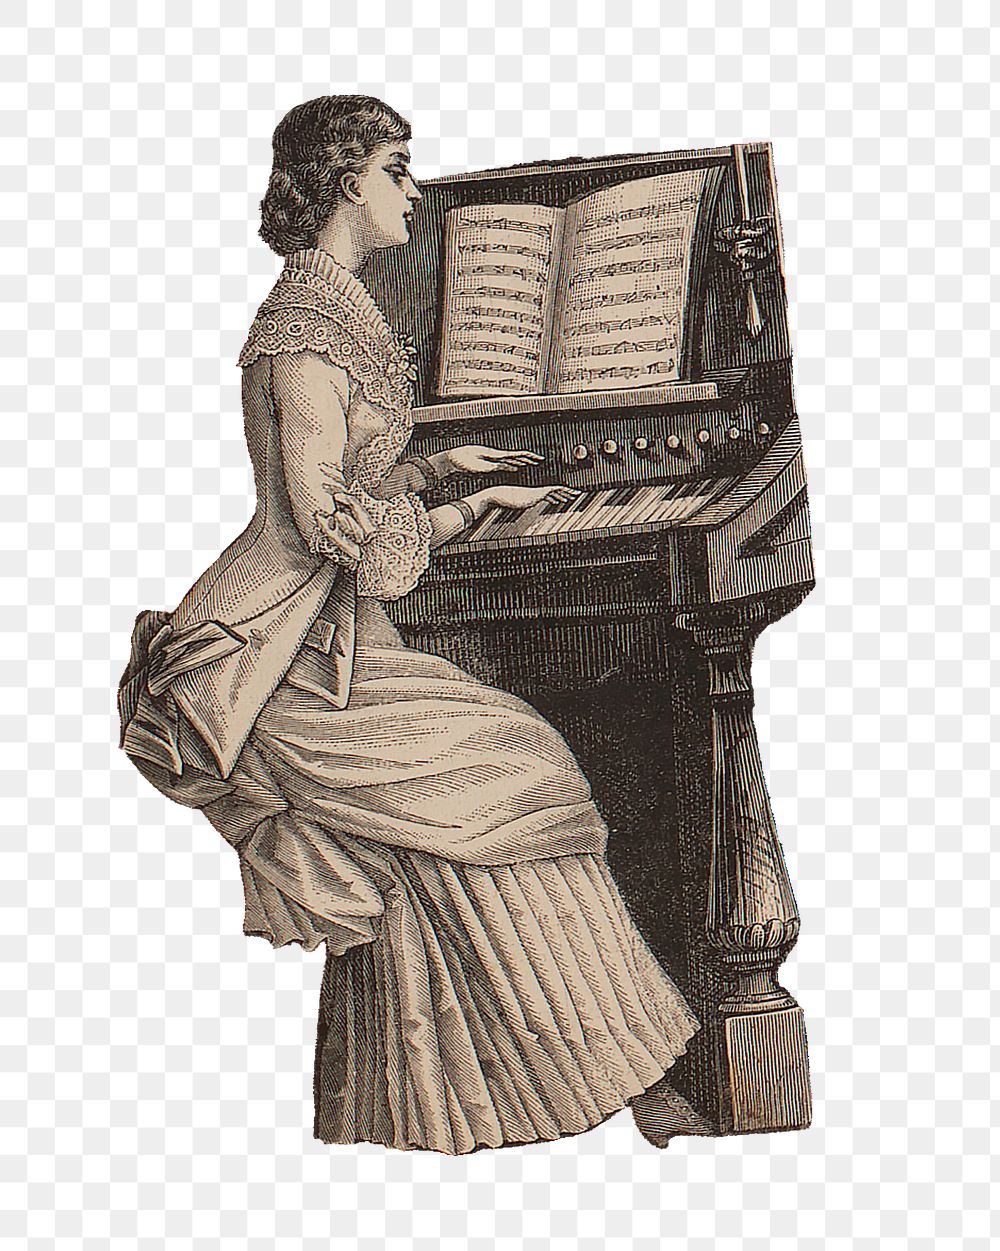 Woman playing piano png sticker, transparent background. Remastered by rawpixel.